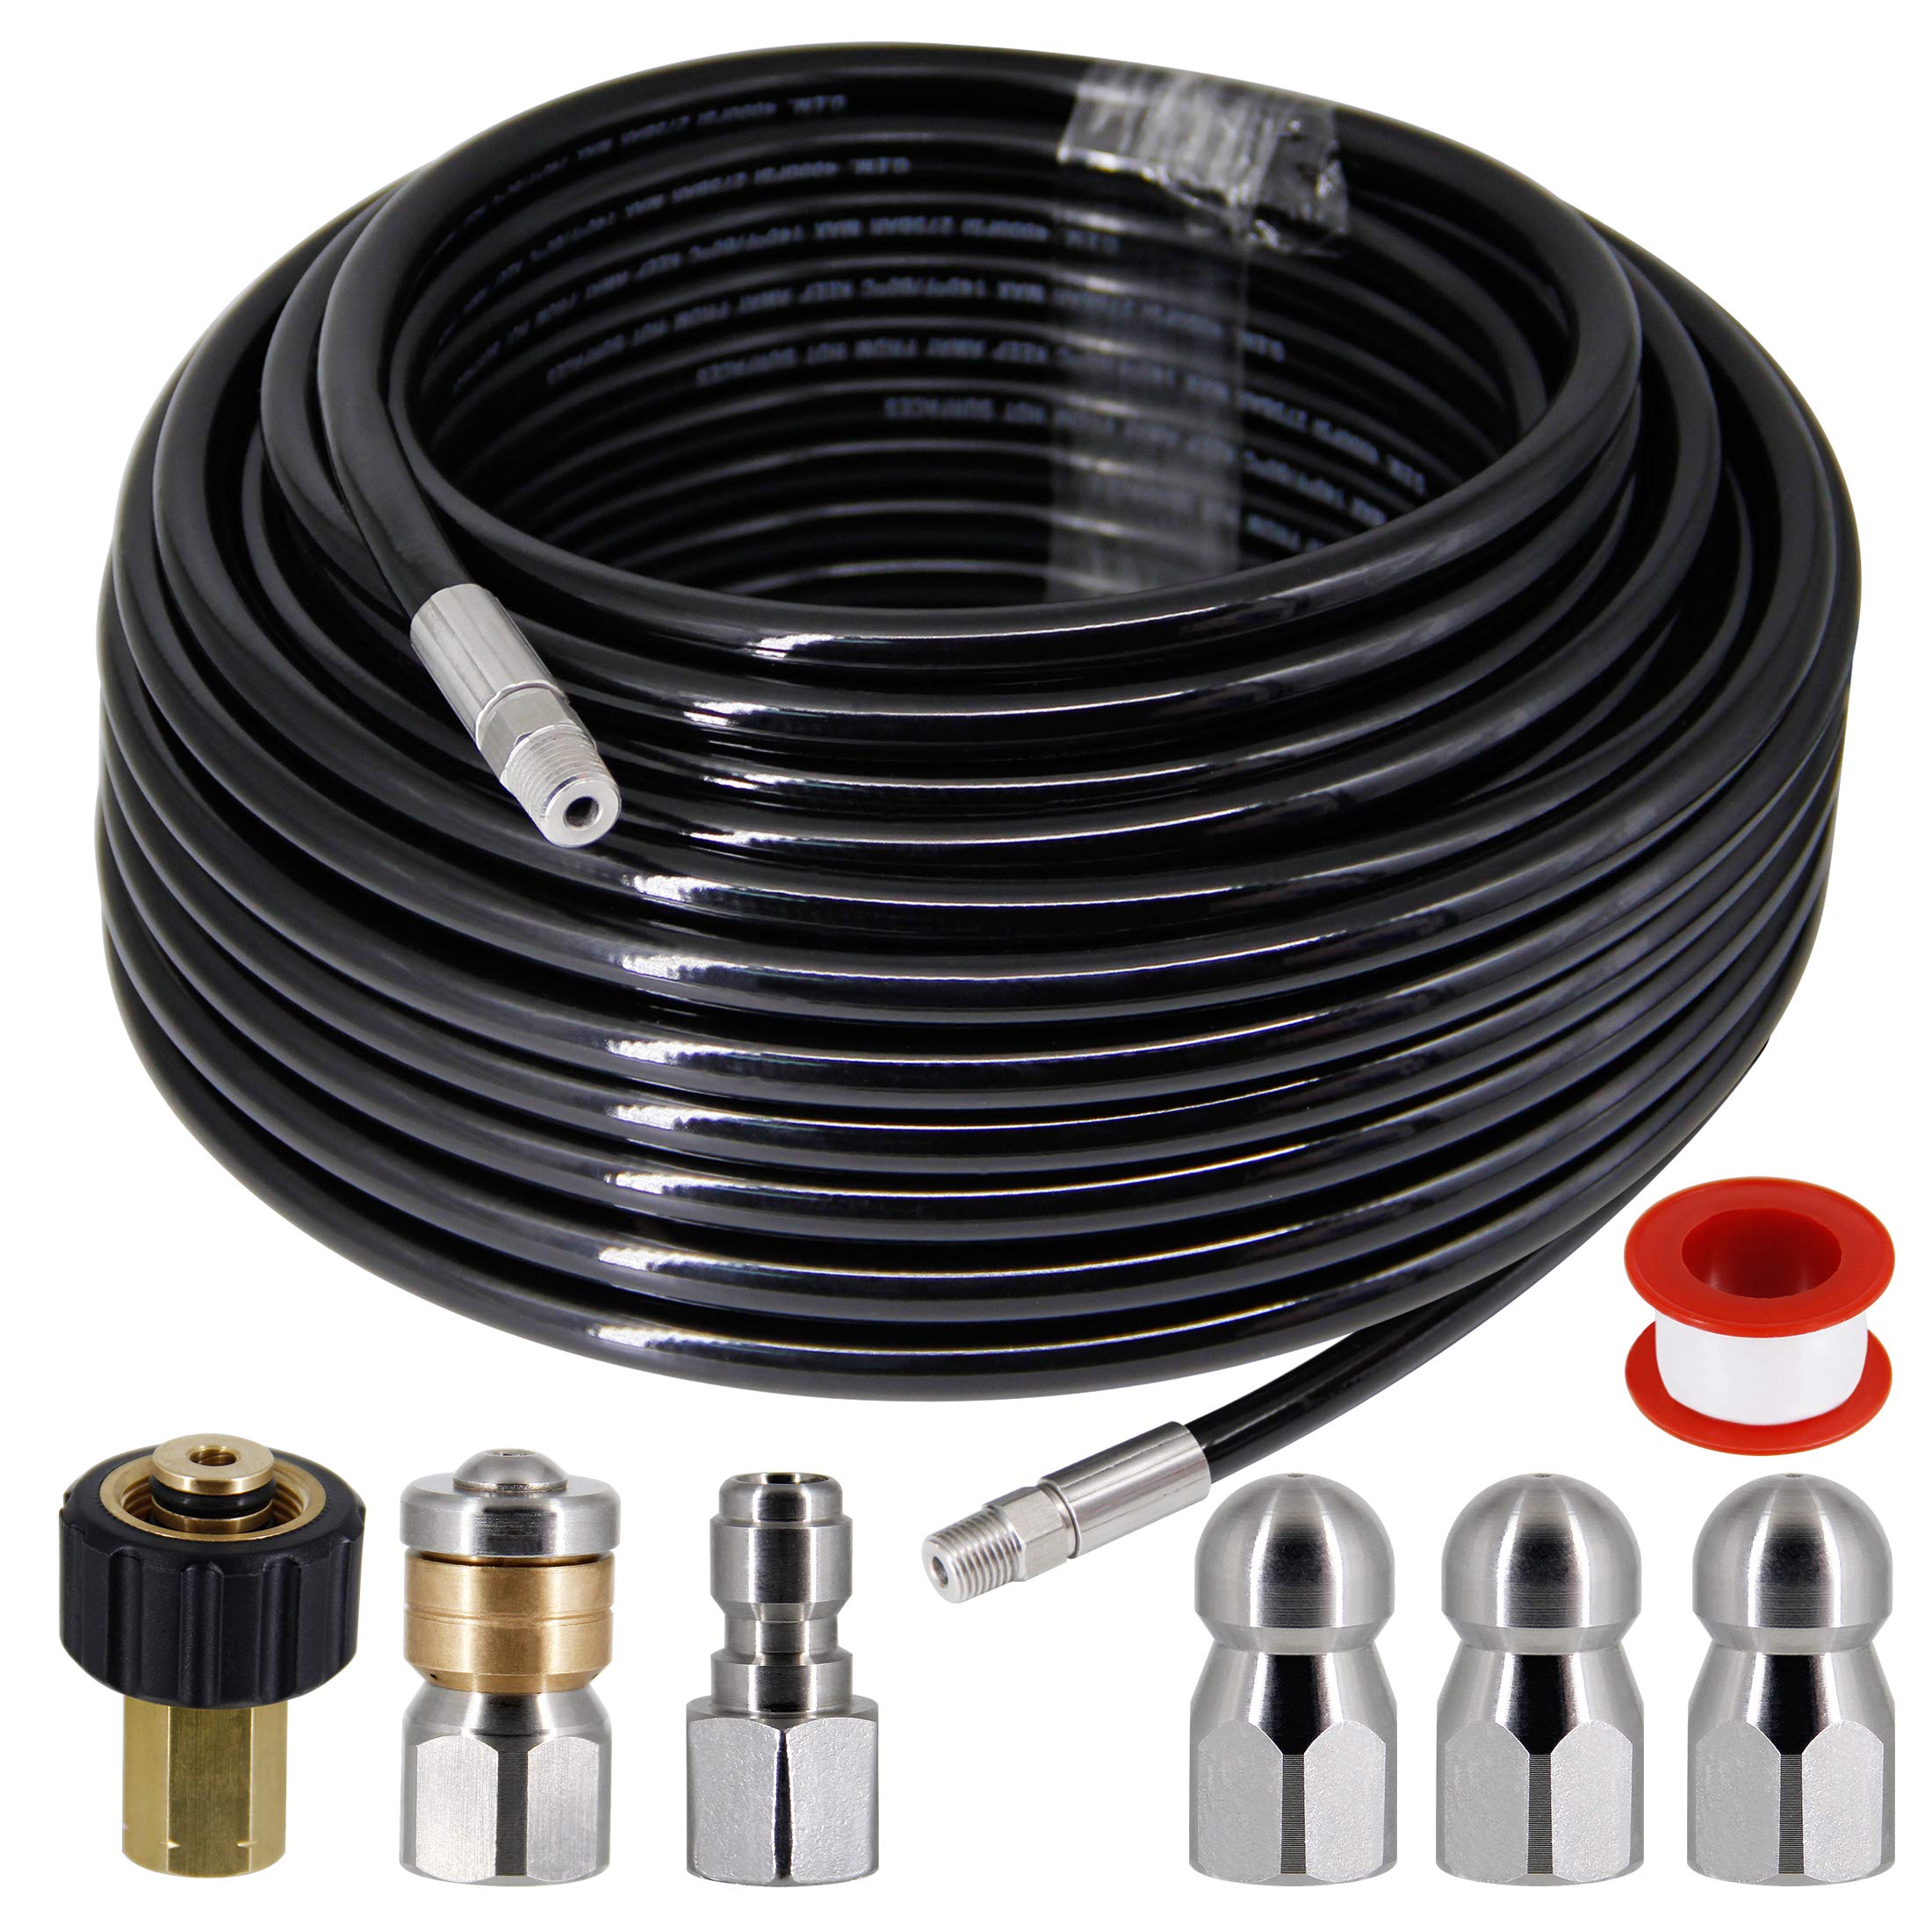 50FT Drain Sewer Pipe Cleaning Hose Jet Nozzle For High Pressure Washer 